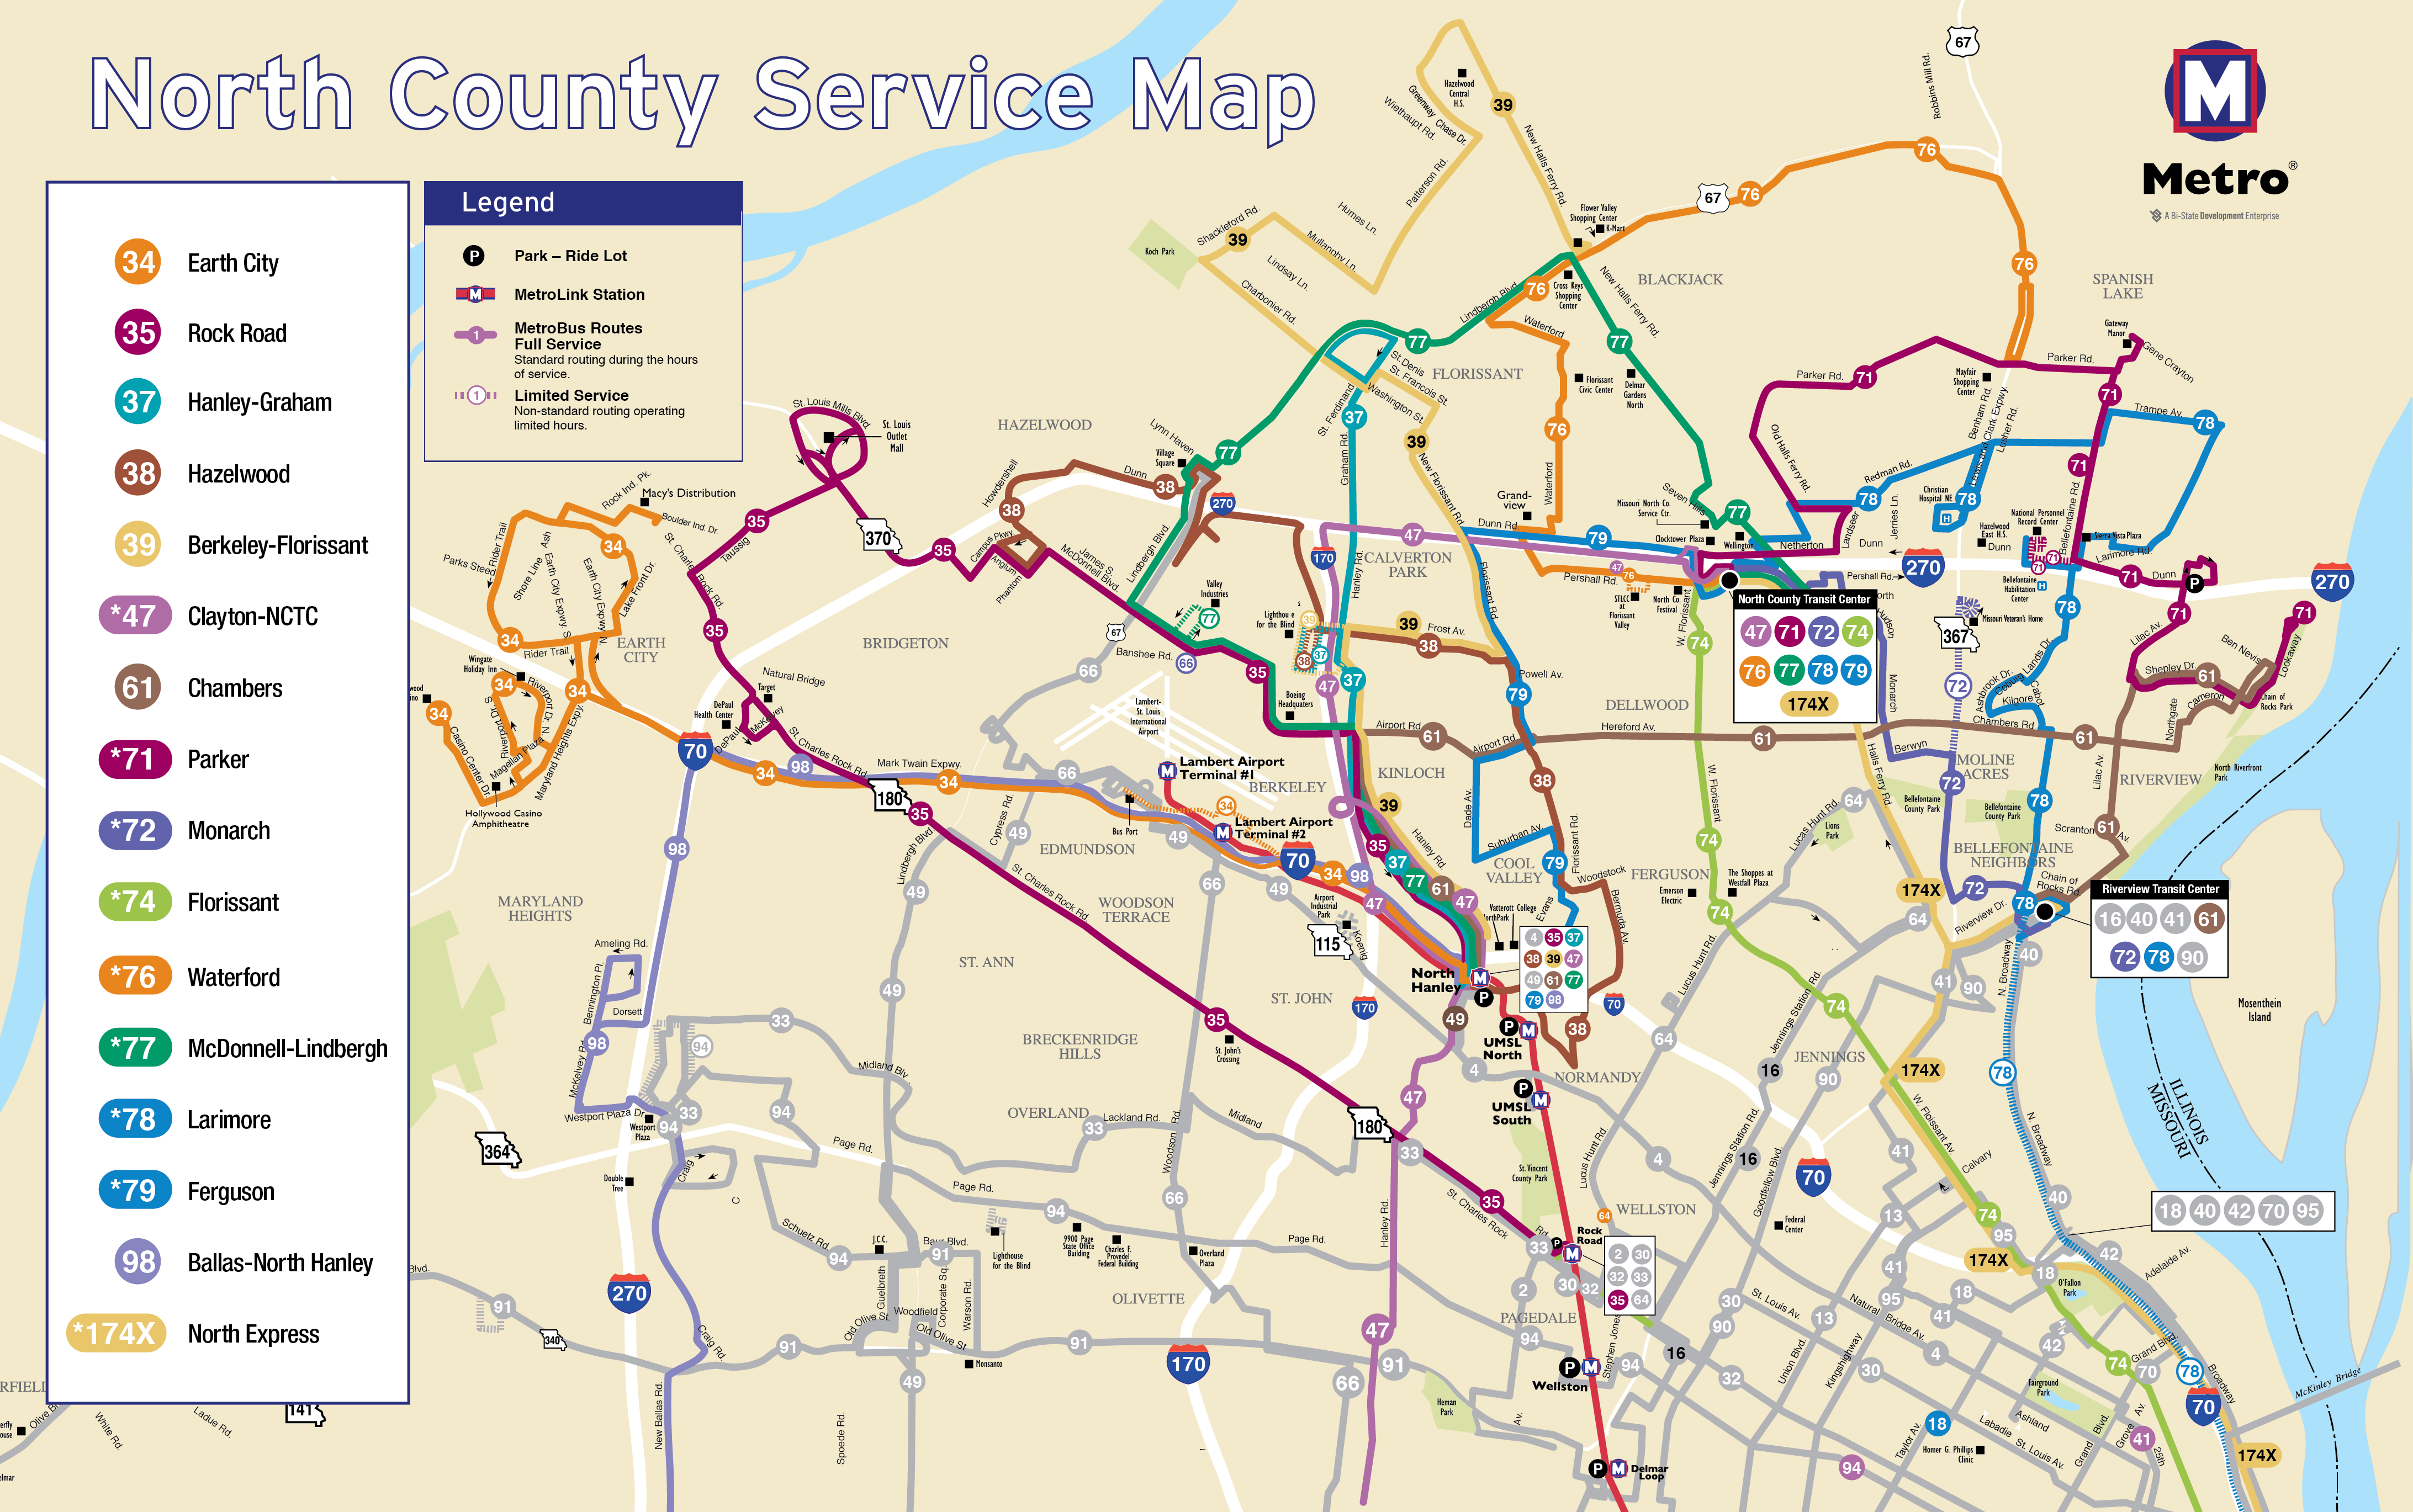 Metro Releases New North County Service Plan | Metro Transit – St. Louis